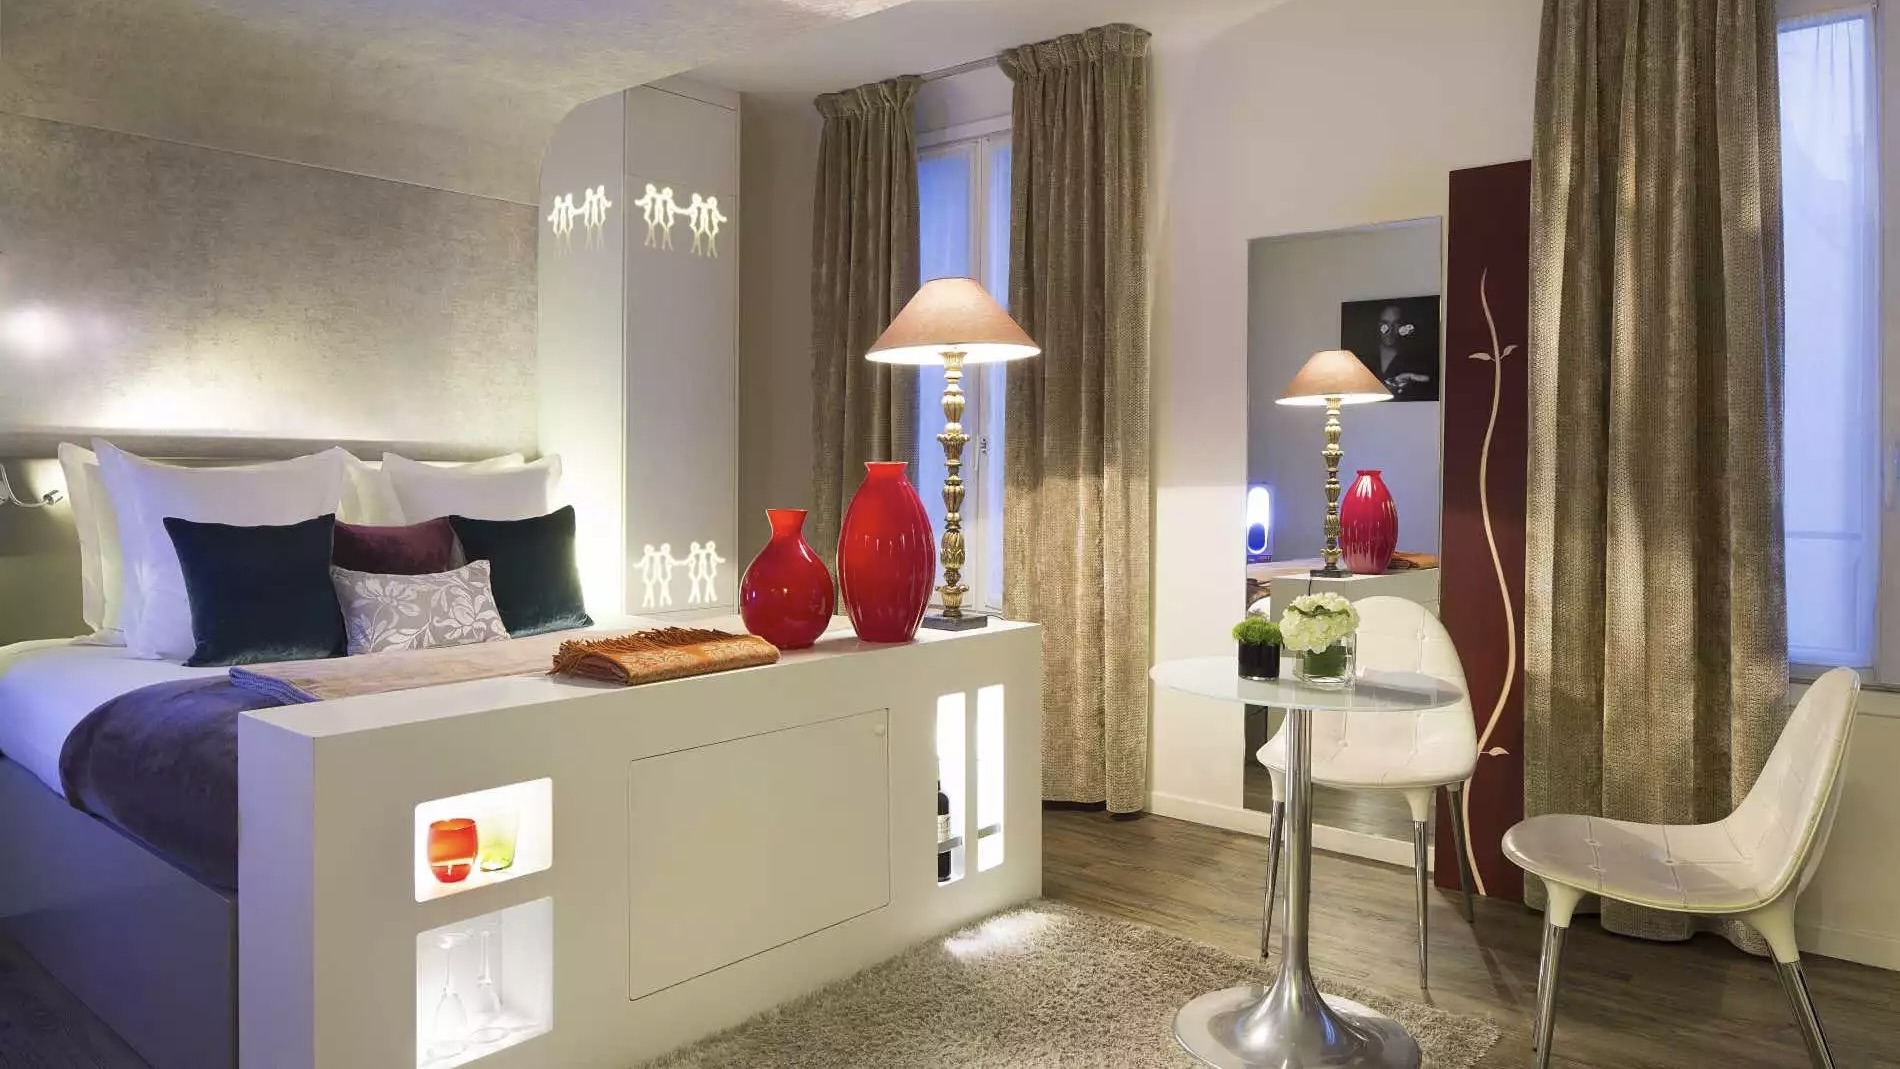 Hotel Gabriel Paris bedroom with red vases at one of the best luxury boutique hotels in Paris